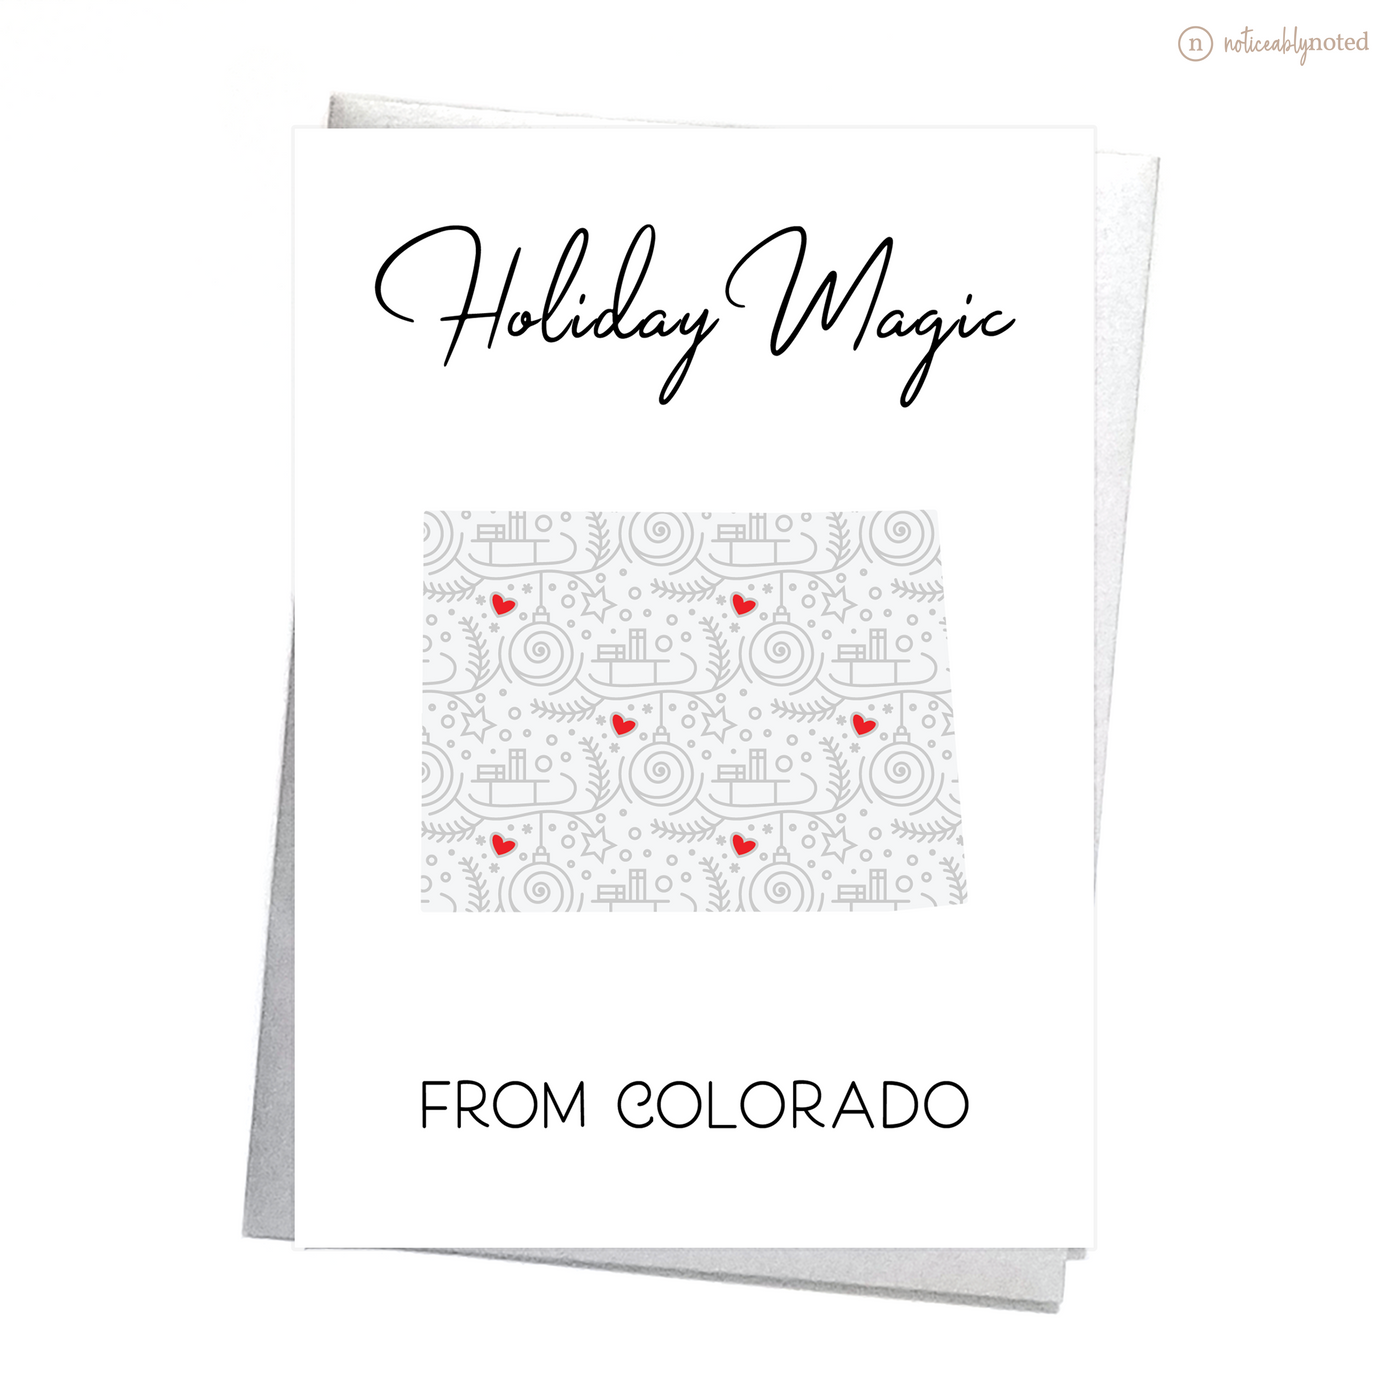 CO Christmas Card | Noticeably Noted